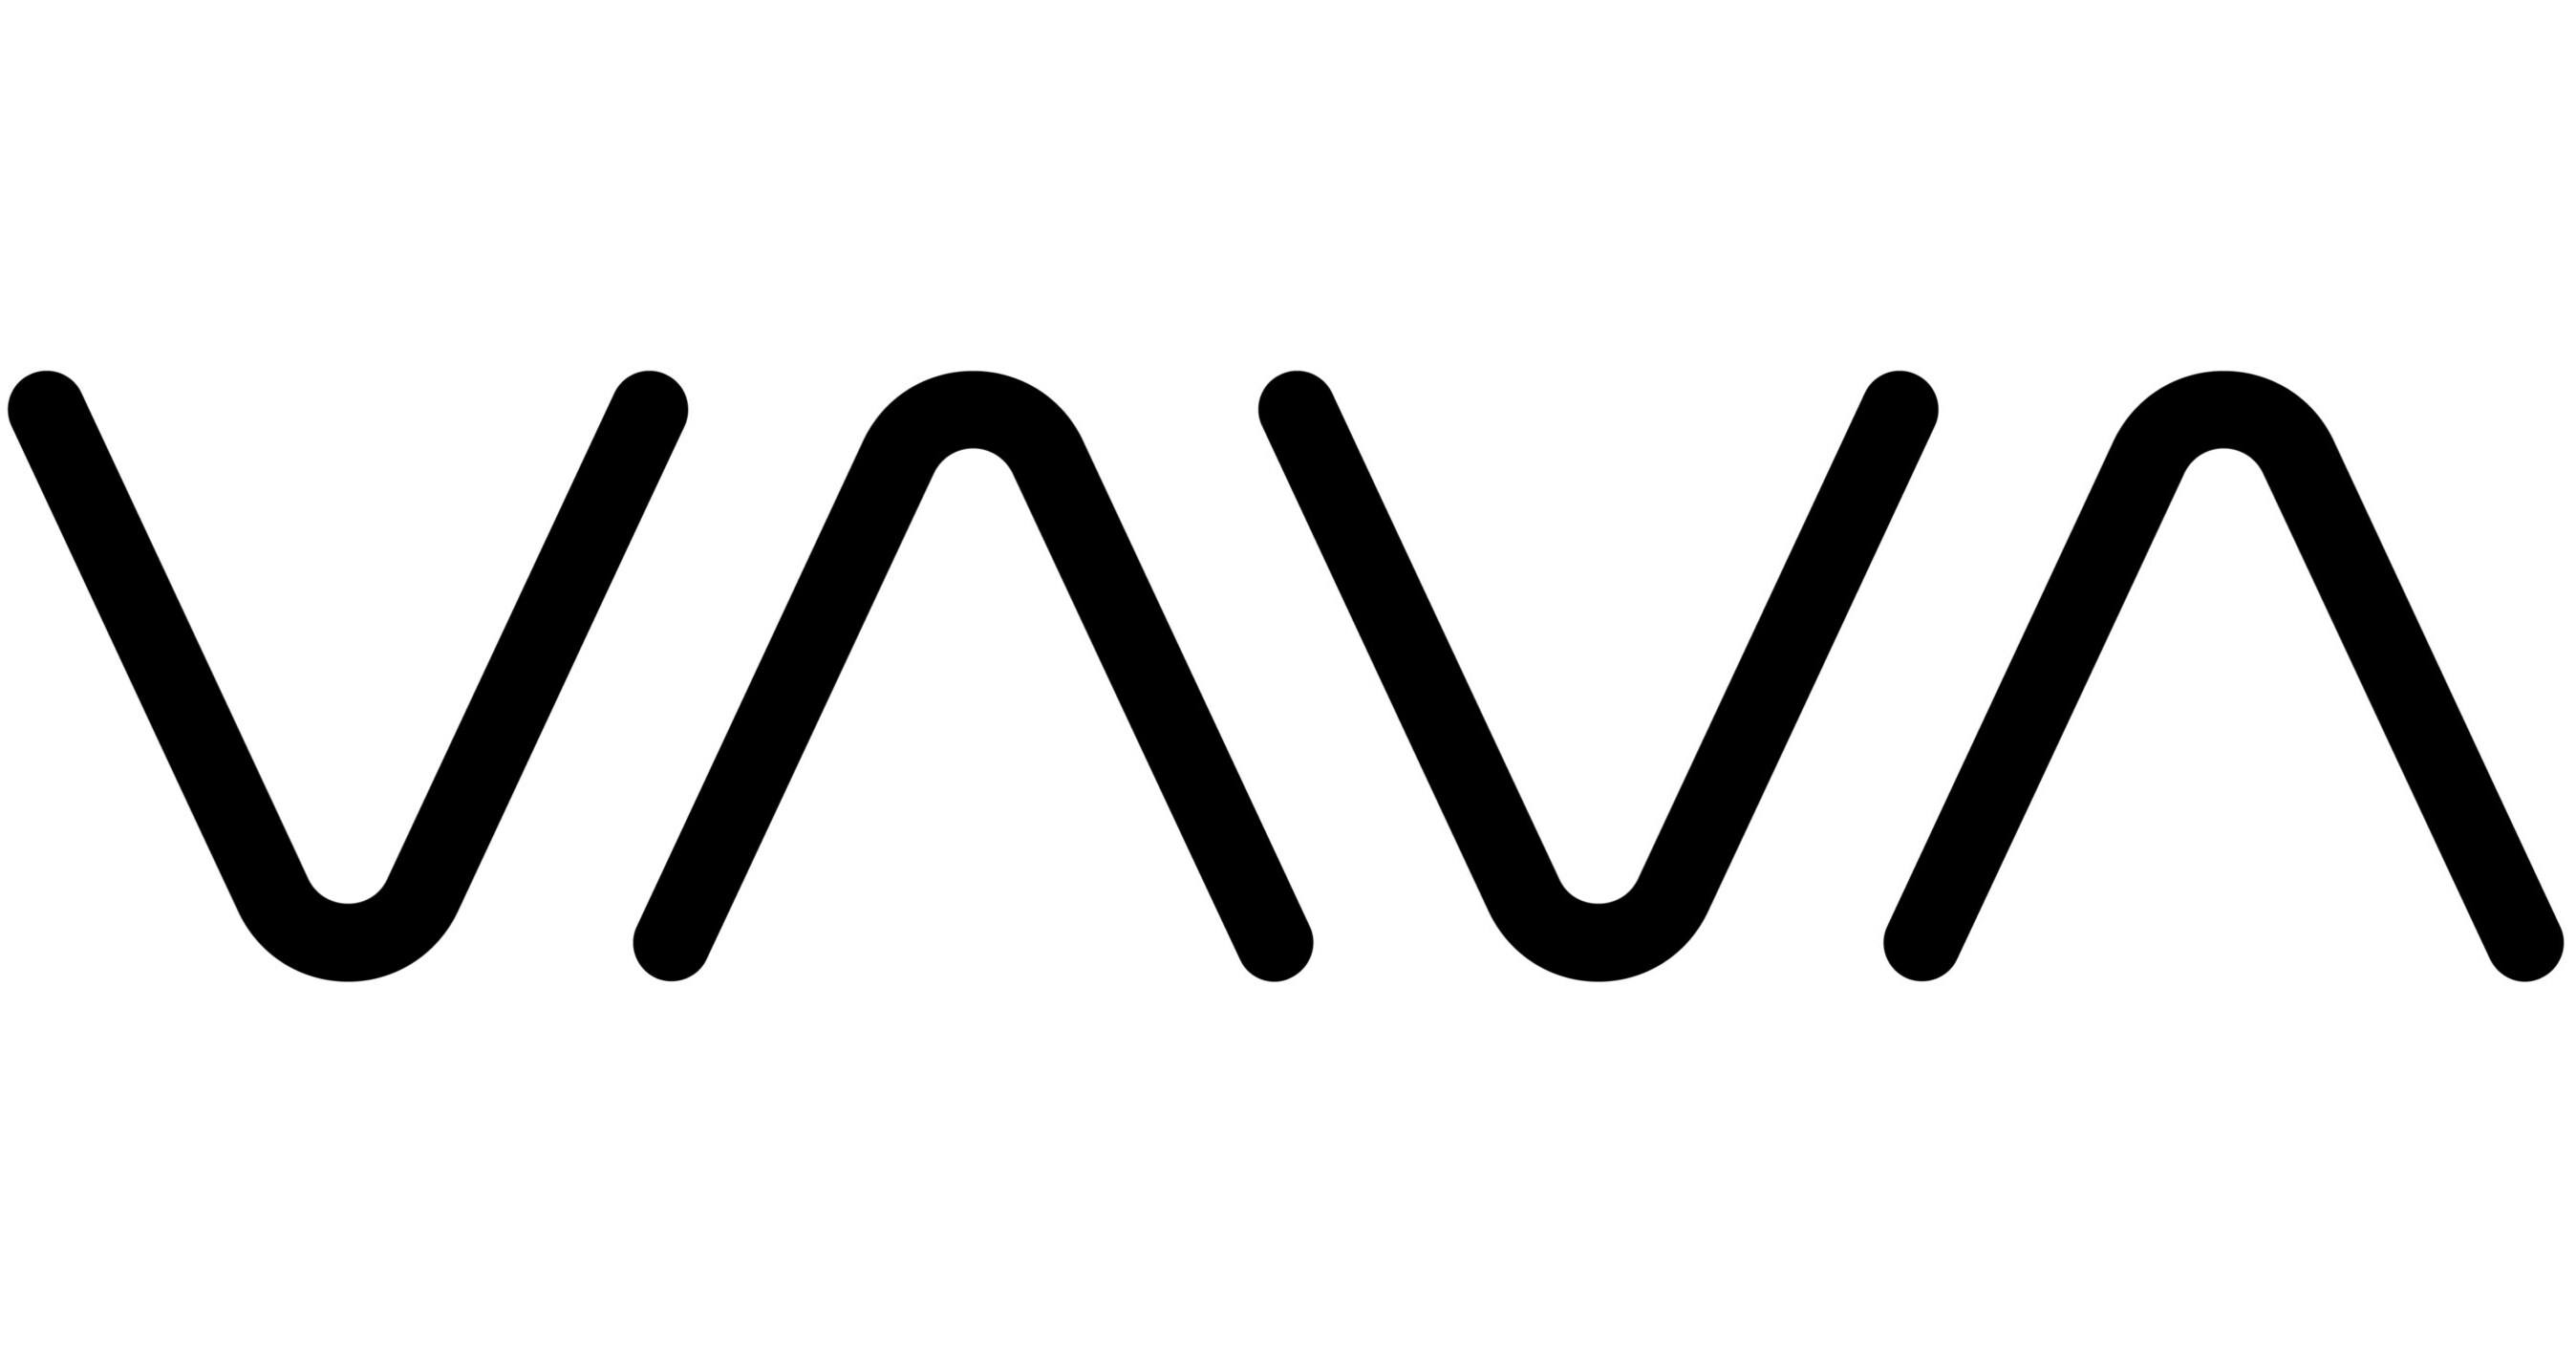 VAVA, Leading Baby and Tech Brand, Unveils Exciting Line of New ...